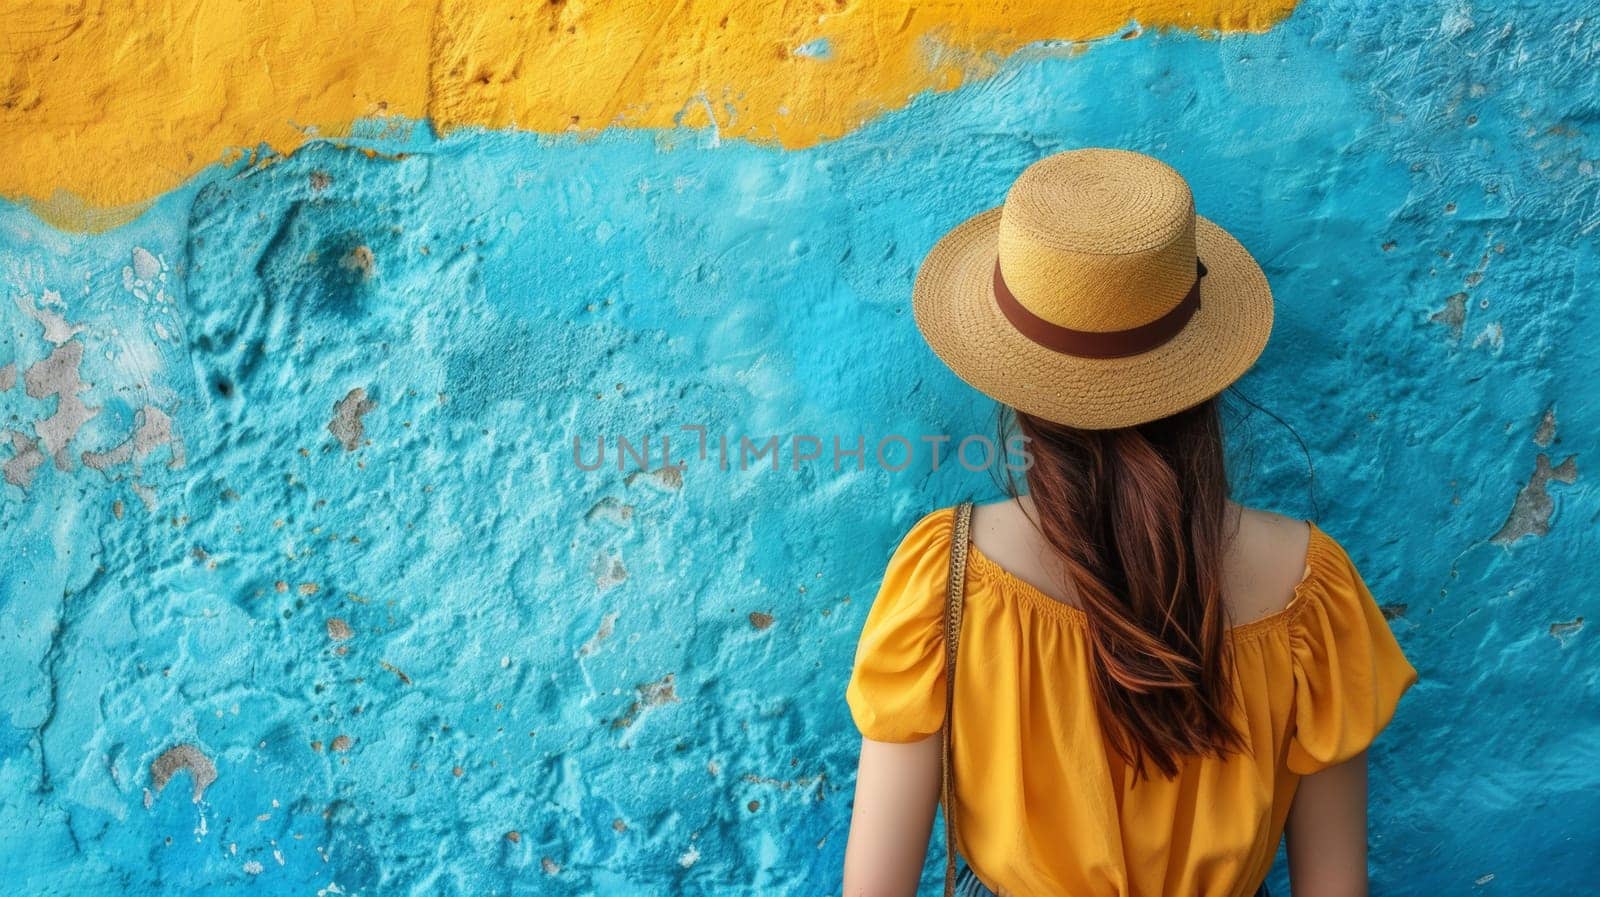 A woman in a yellow dress and hat looking at the wall